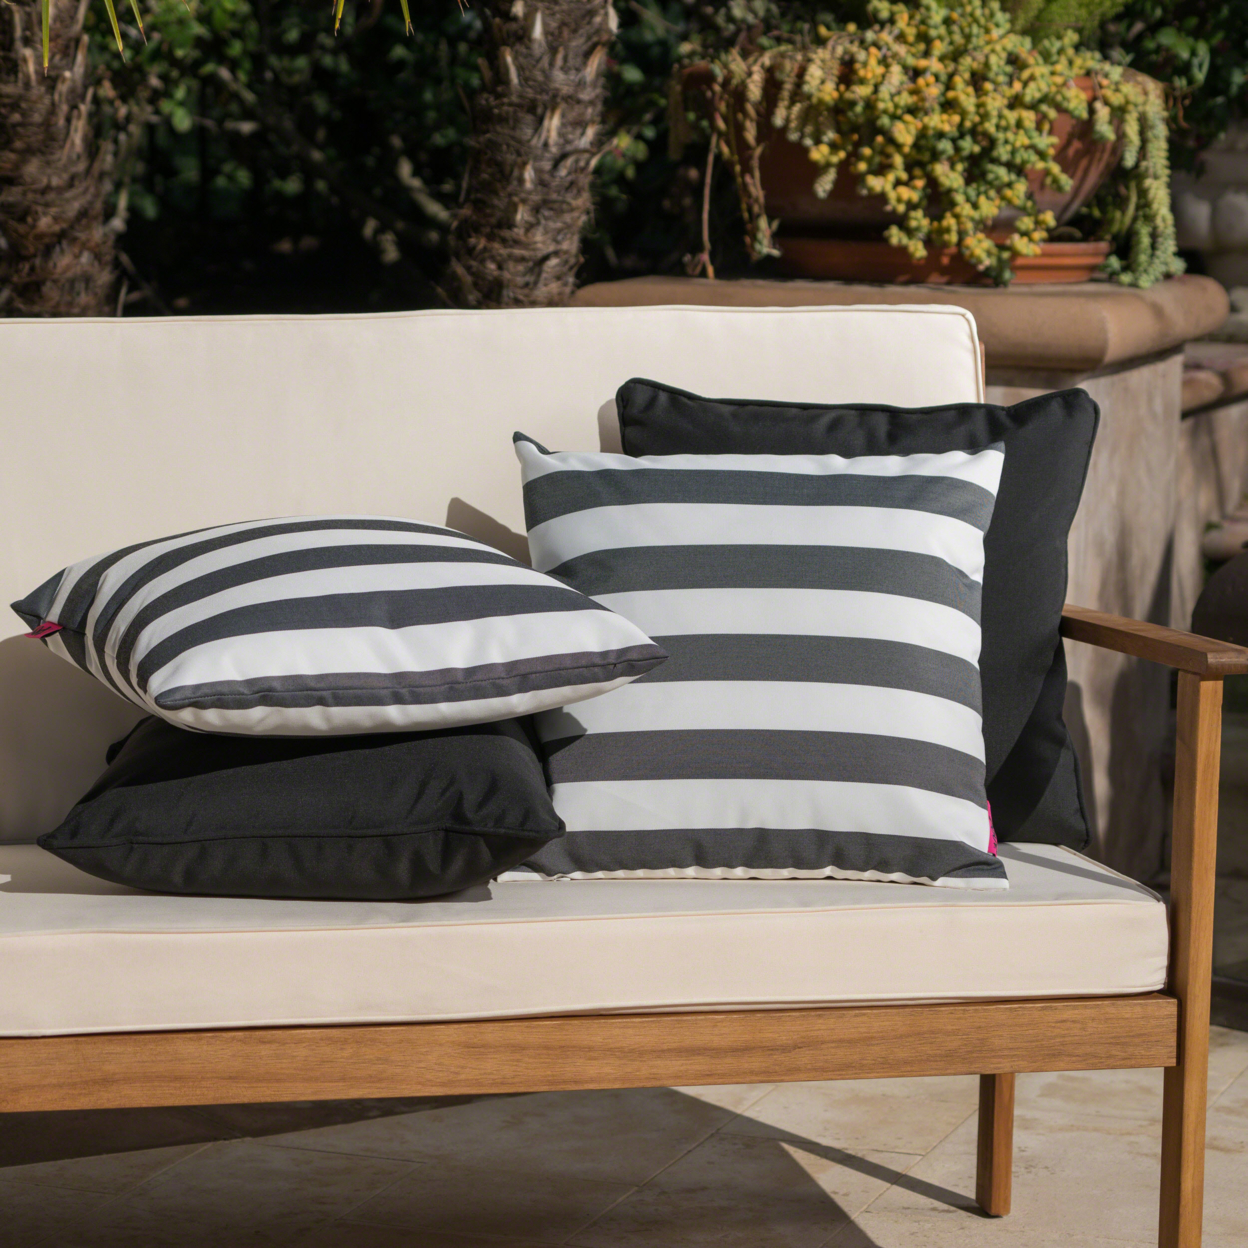 La Jolla Outdoor Striped Water Resistant Square Throw Pillows - Set Of 4 - Green/White - Zigzag